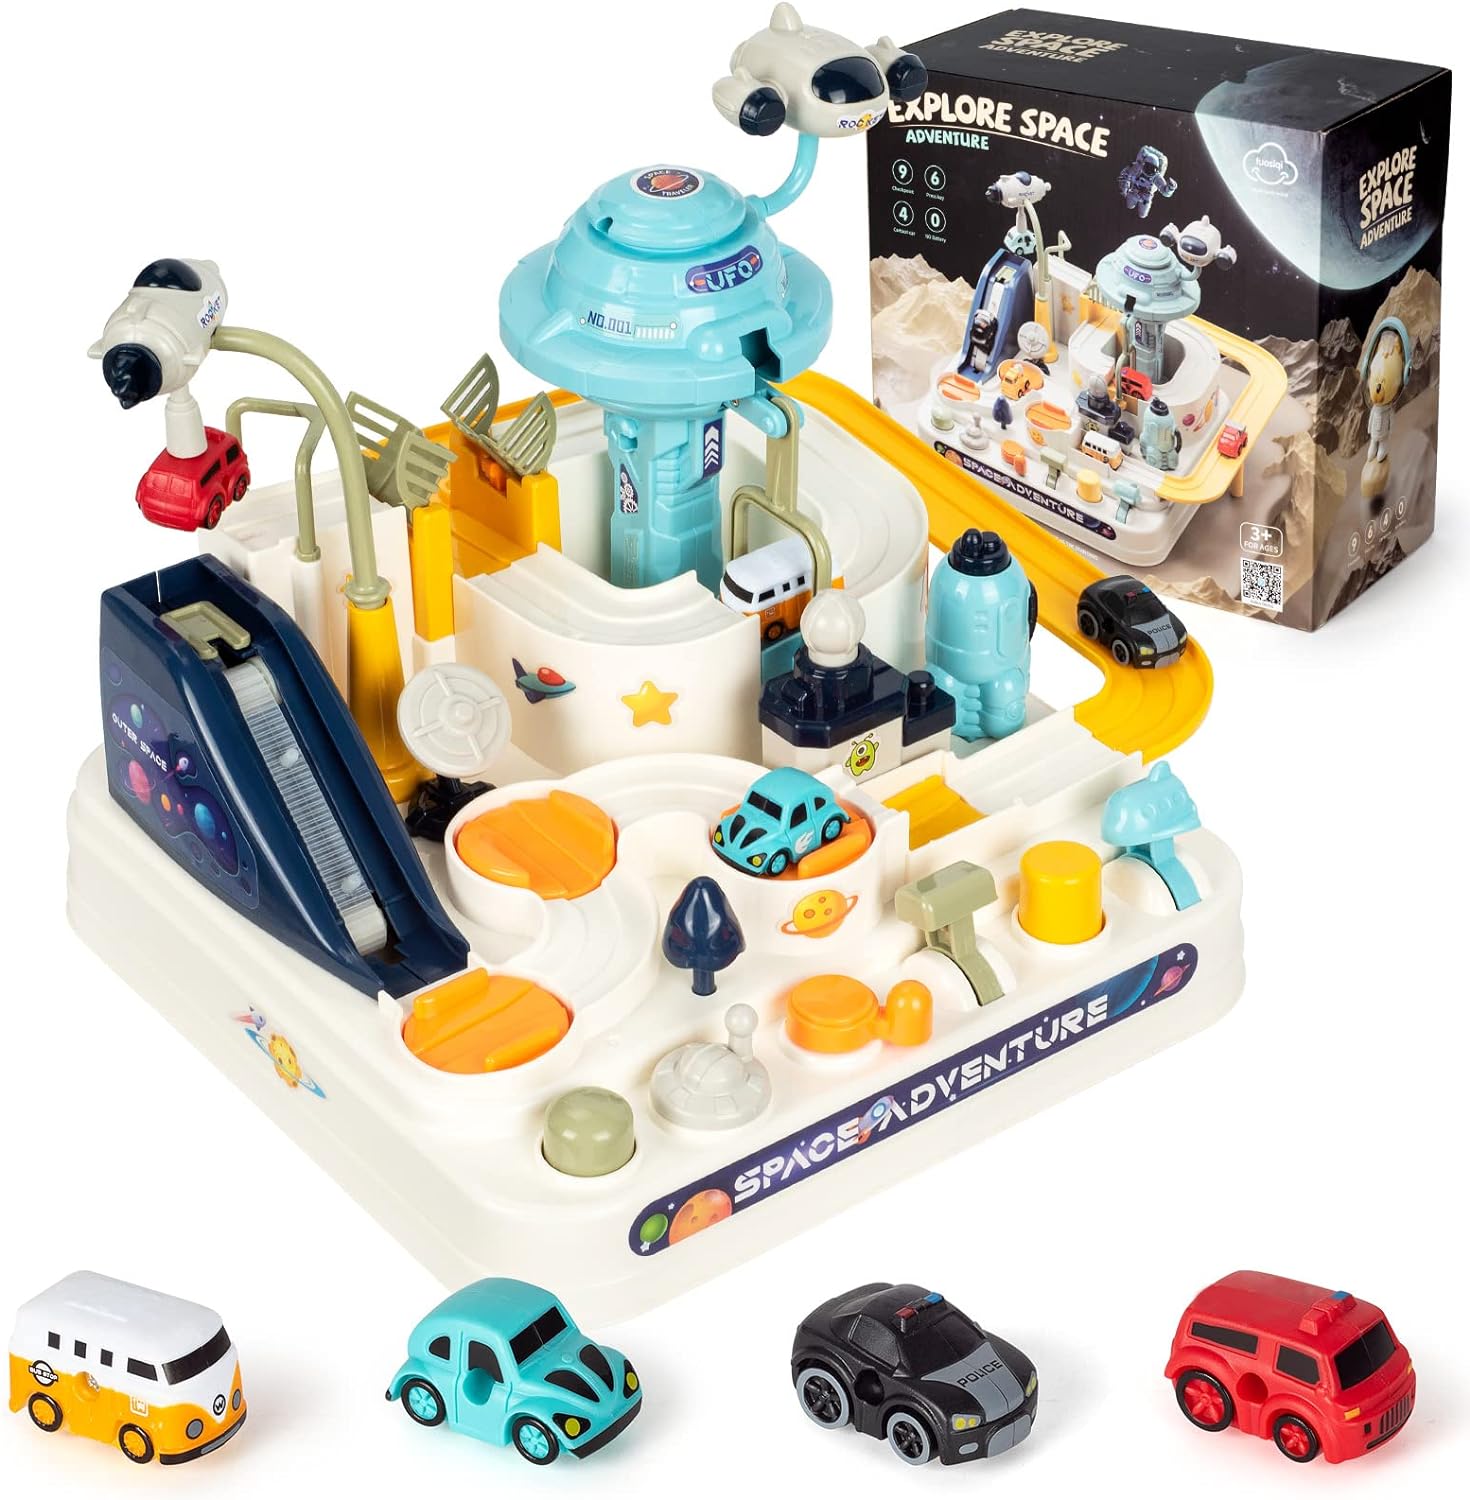  Space Adventure Toy